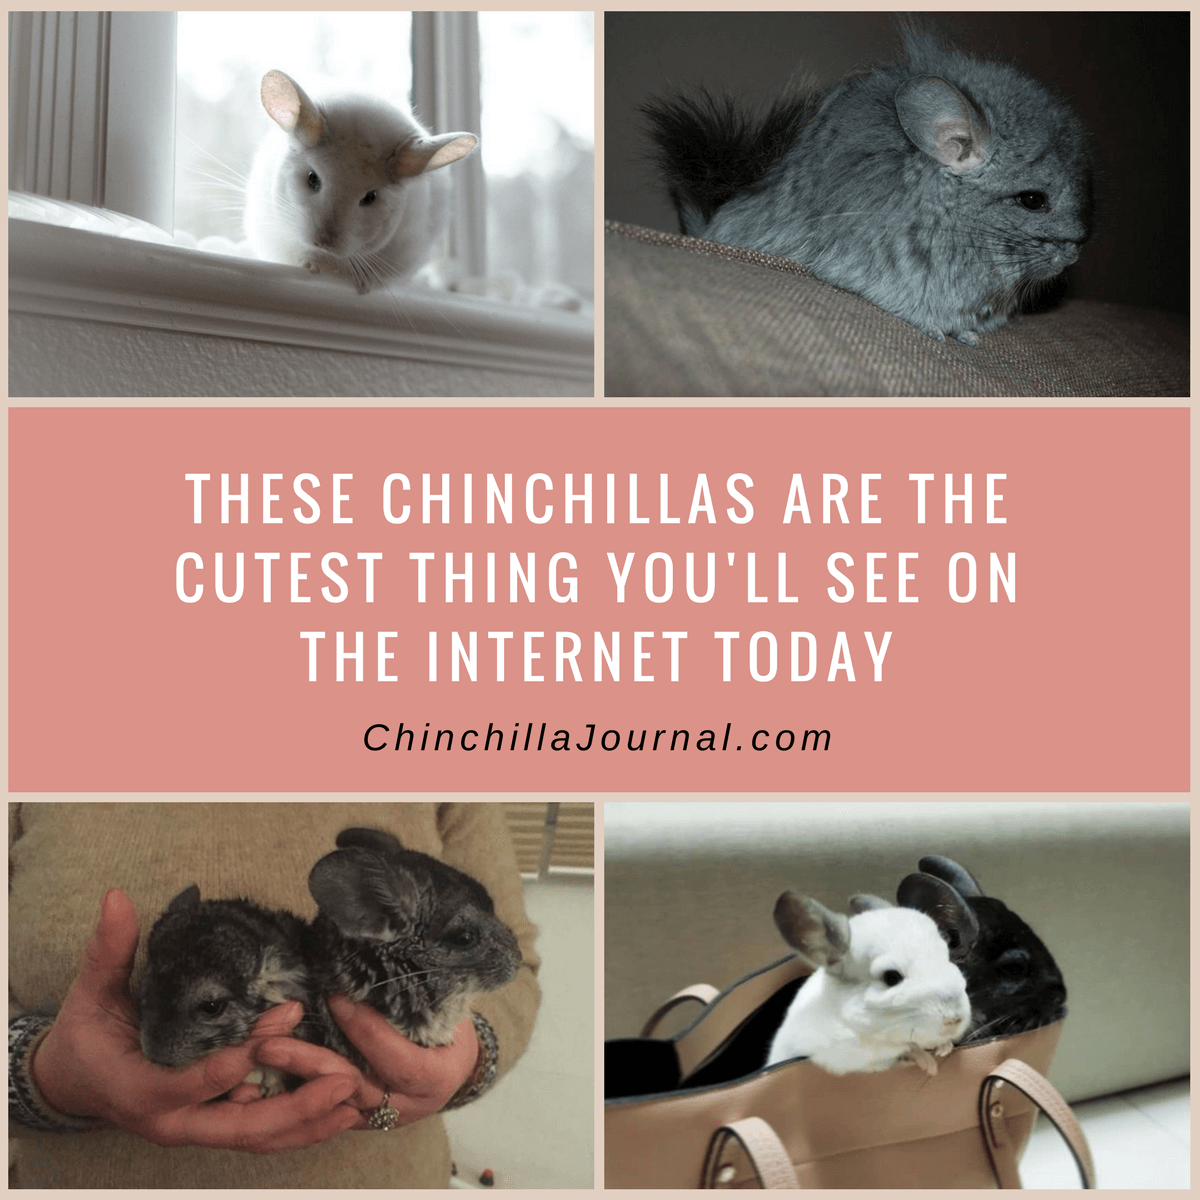 These Chinchillas Are The Cutest Thing You'll See On The Internet Today